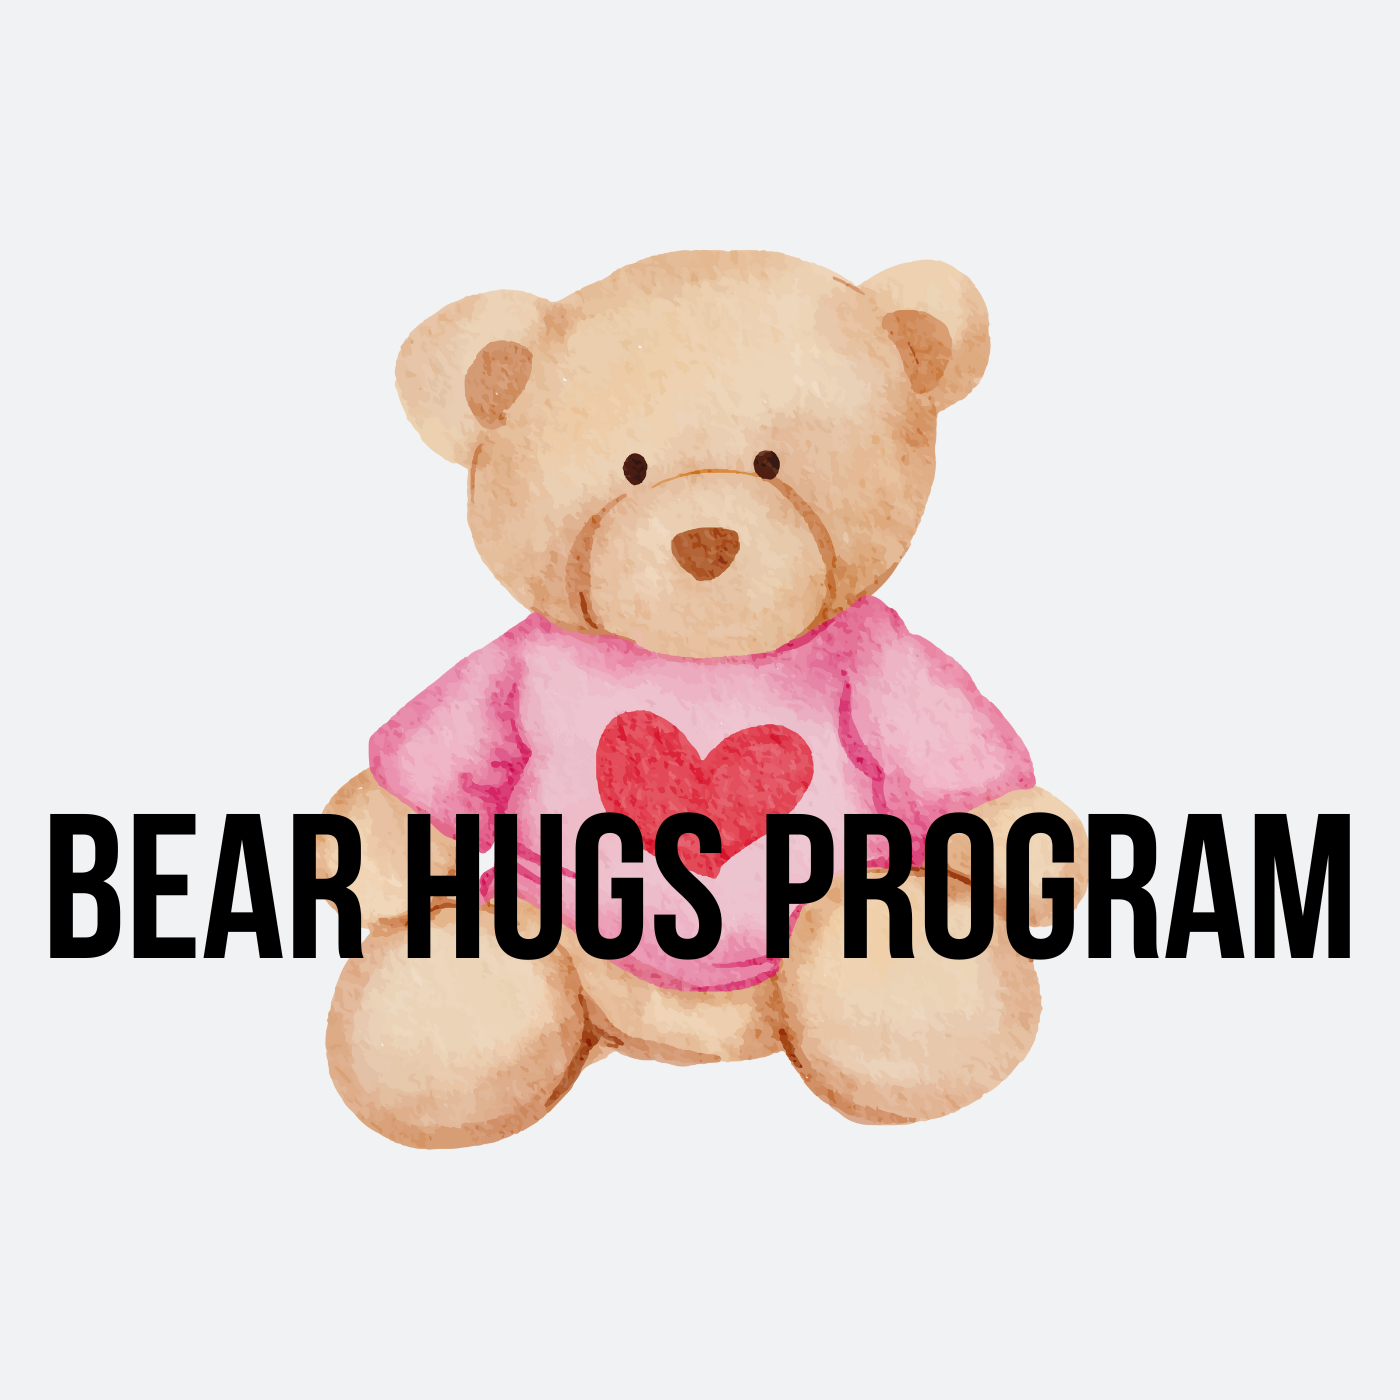 Bear Hugs Program - Consider us your friend. We provide direct help and resources for those in need.